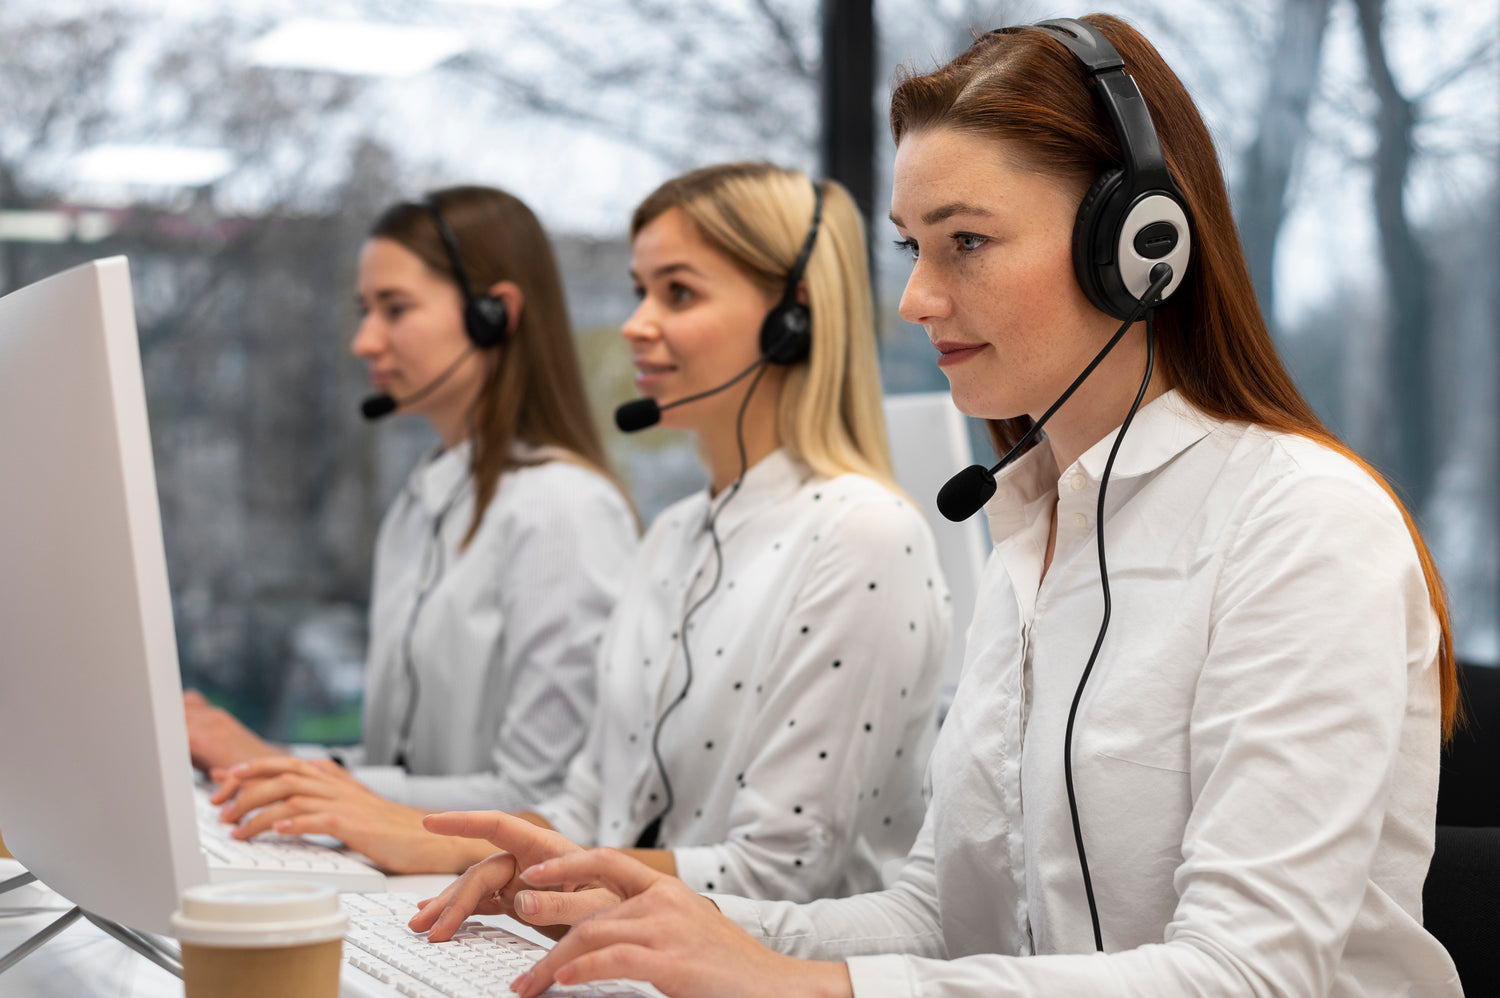 colleagues-working-together-call-center-with-headphones.jpg__PID:1ba9f59b-268f-44a2-8160-5b8d7cd1c128